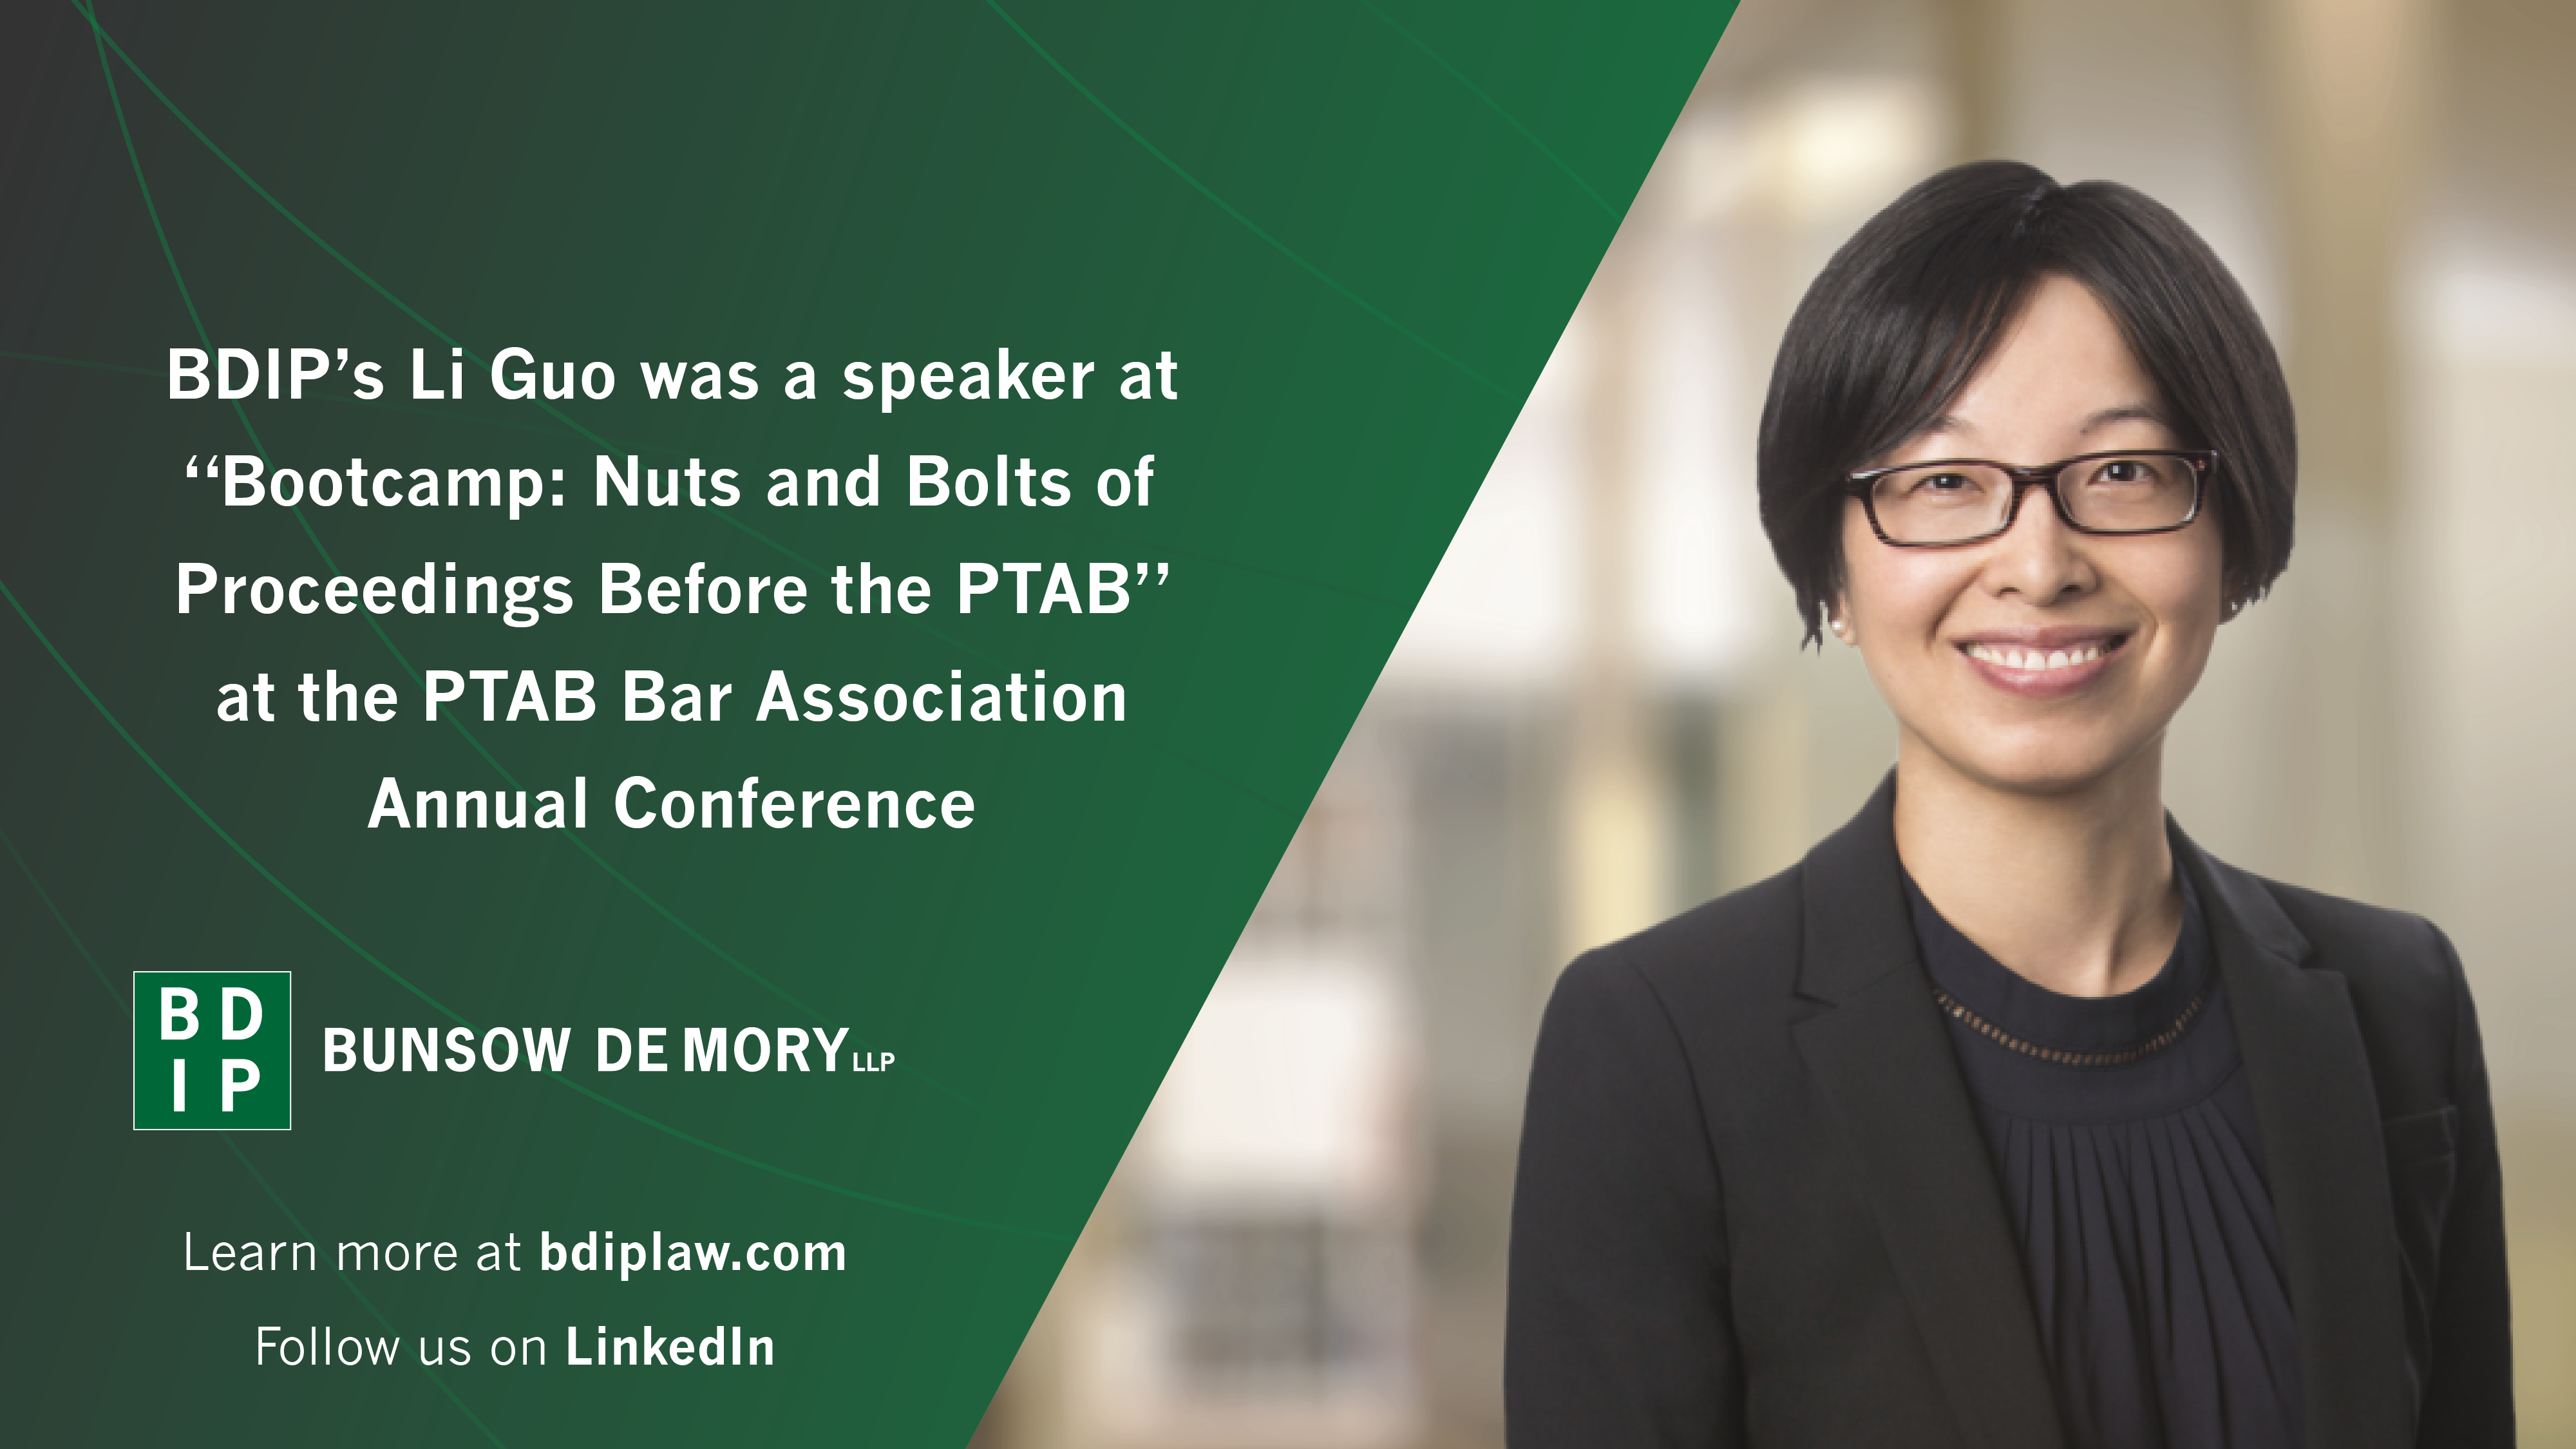 Li Guo Was a Speaker at the PTAB Bar Association Annual Conference